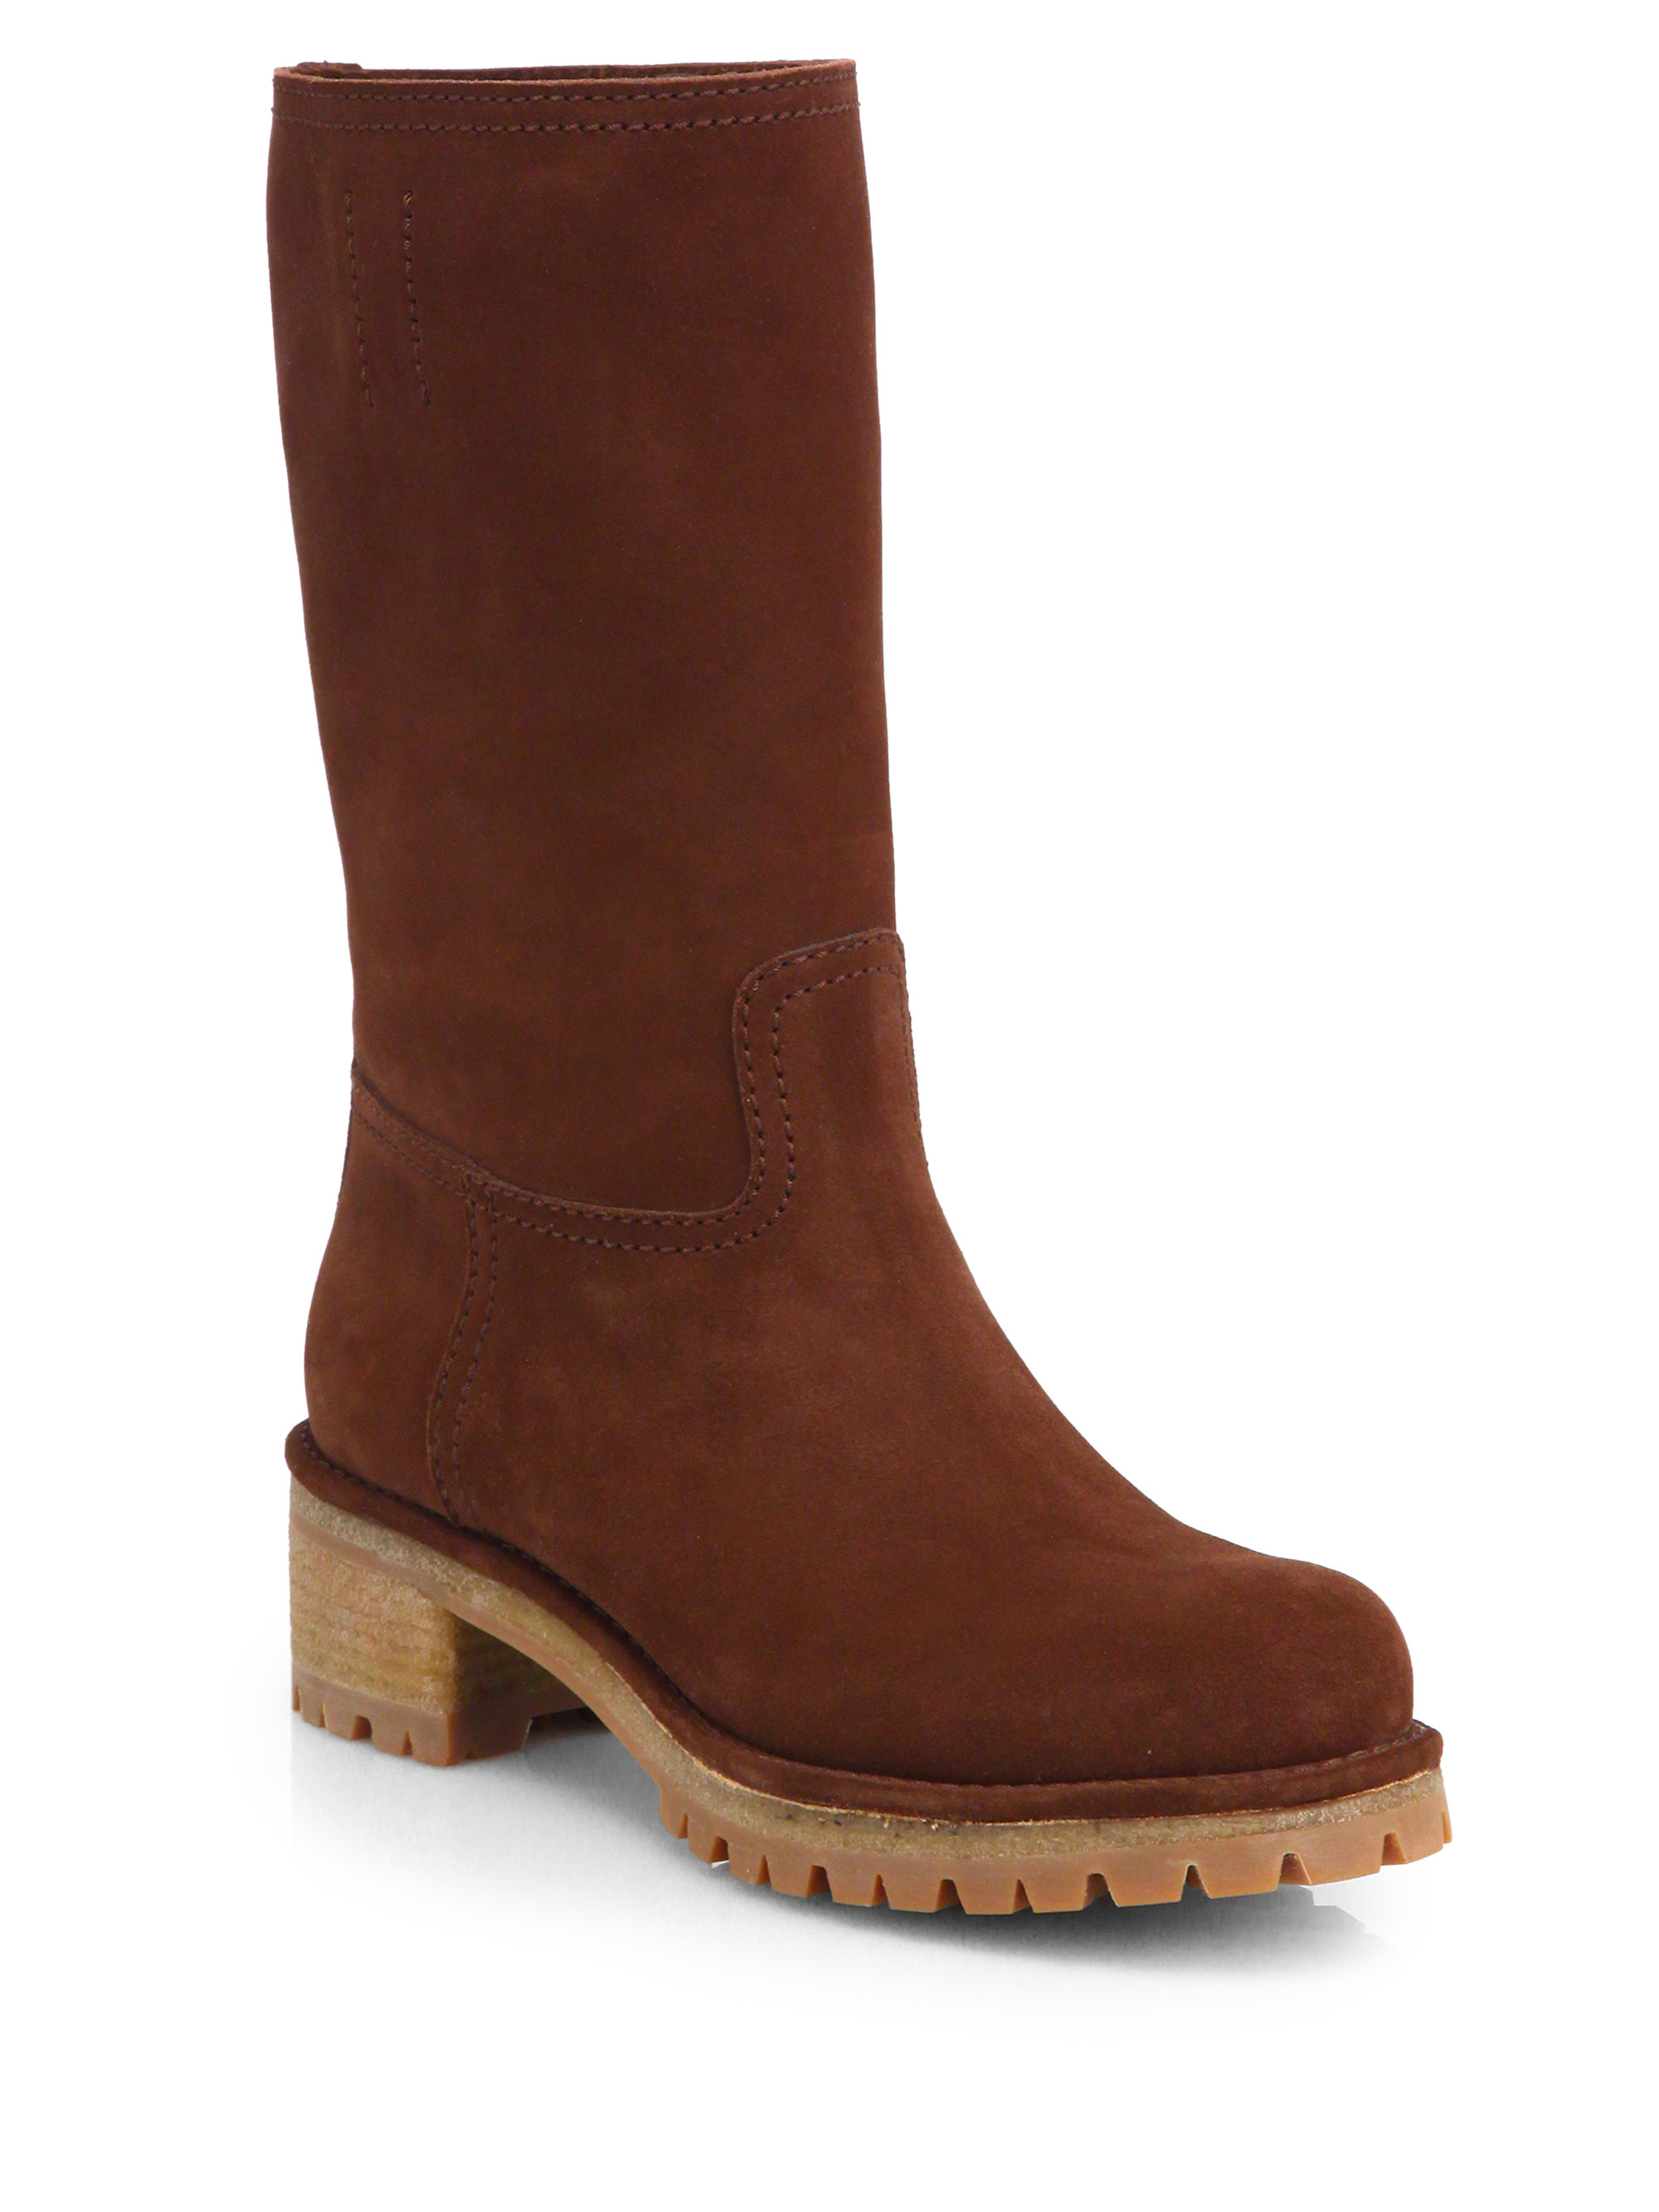 Prada Suede Mid-Calf Boots in Brown - Lyst